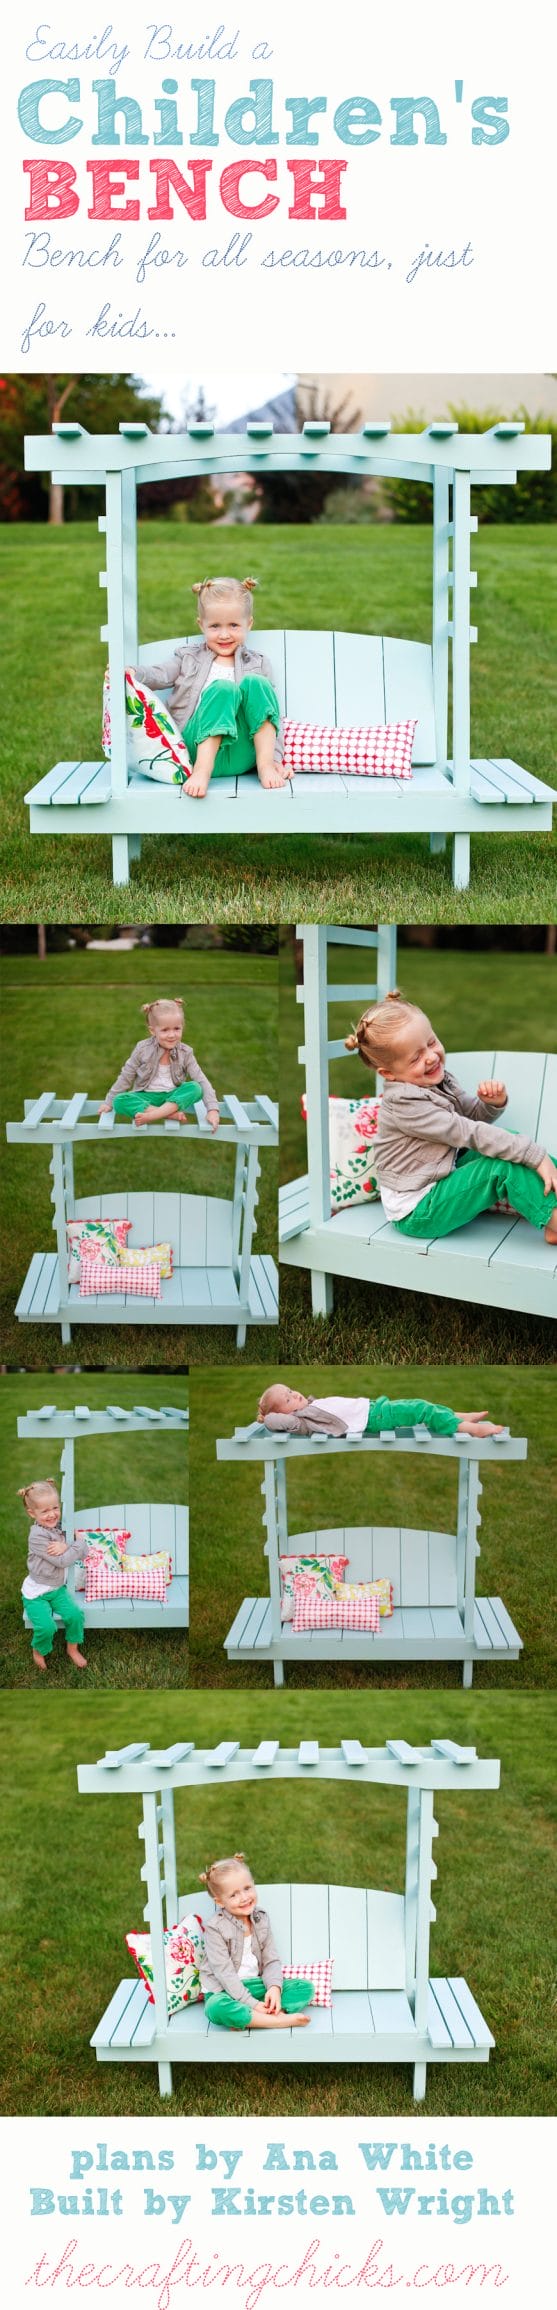 DIY Children's Arbor Bench | A fun project that will provide hours of fun in your backyard this summer!